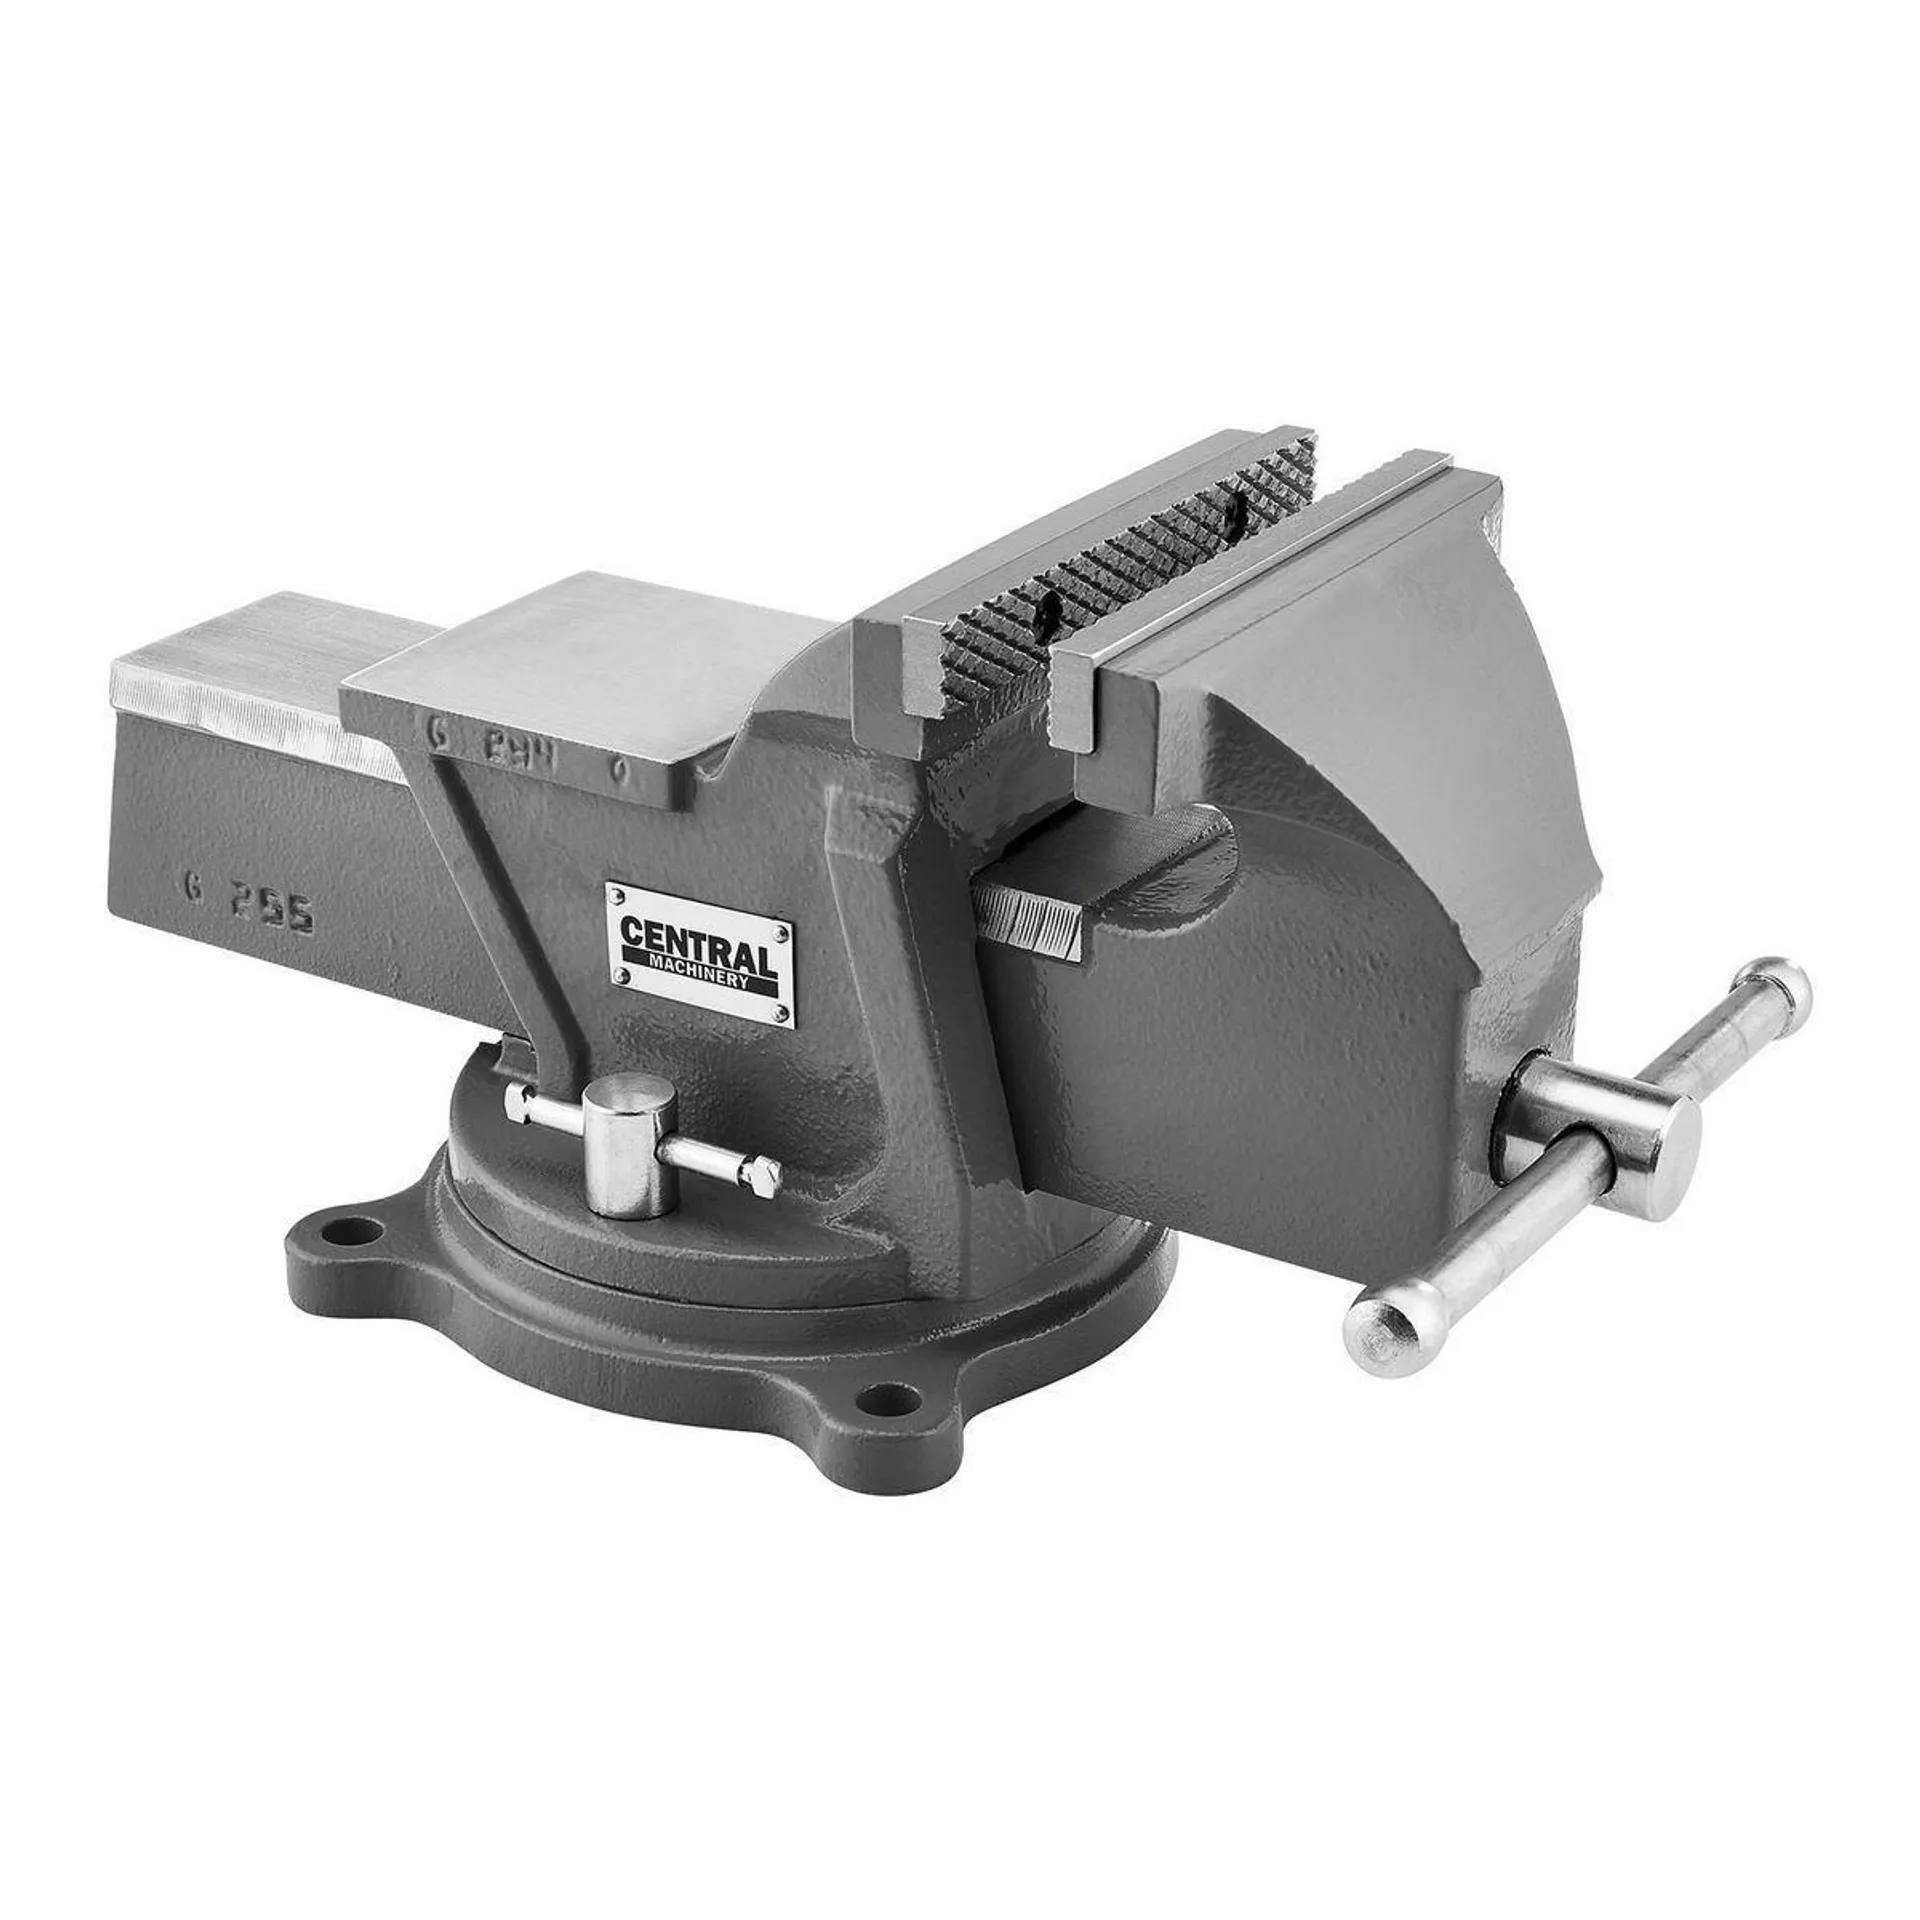 CENTRAL MACHINERY 6 in. Swivel Vise with Anvil